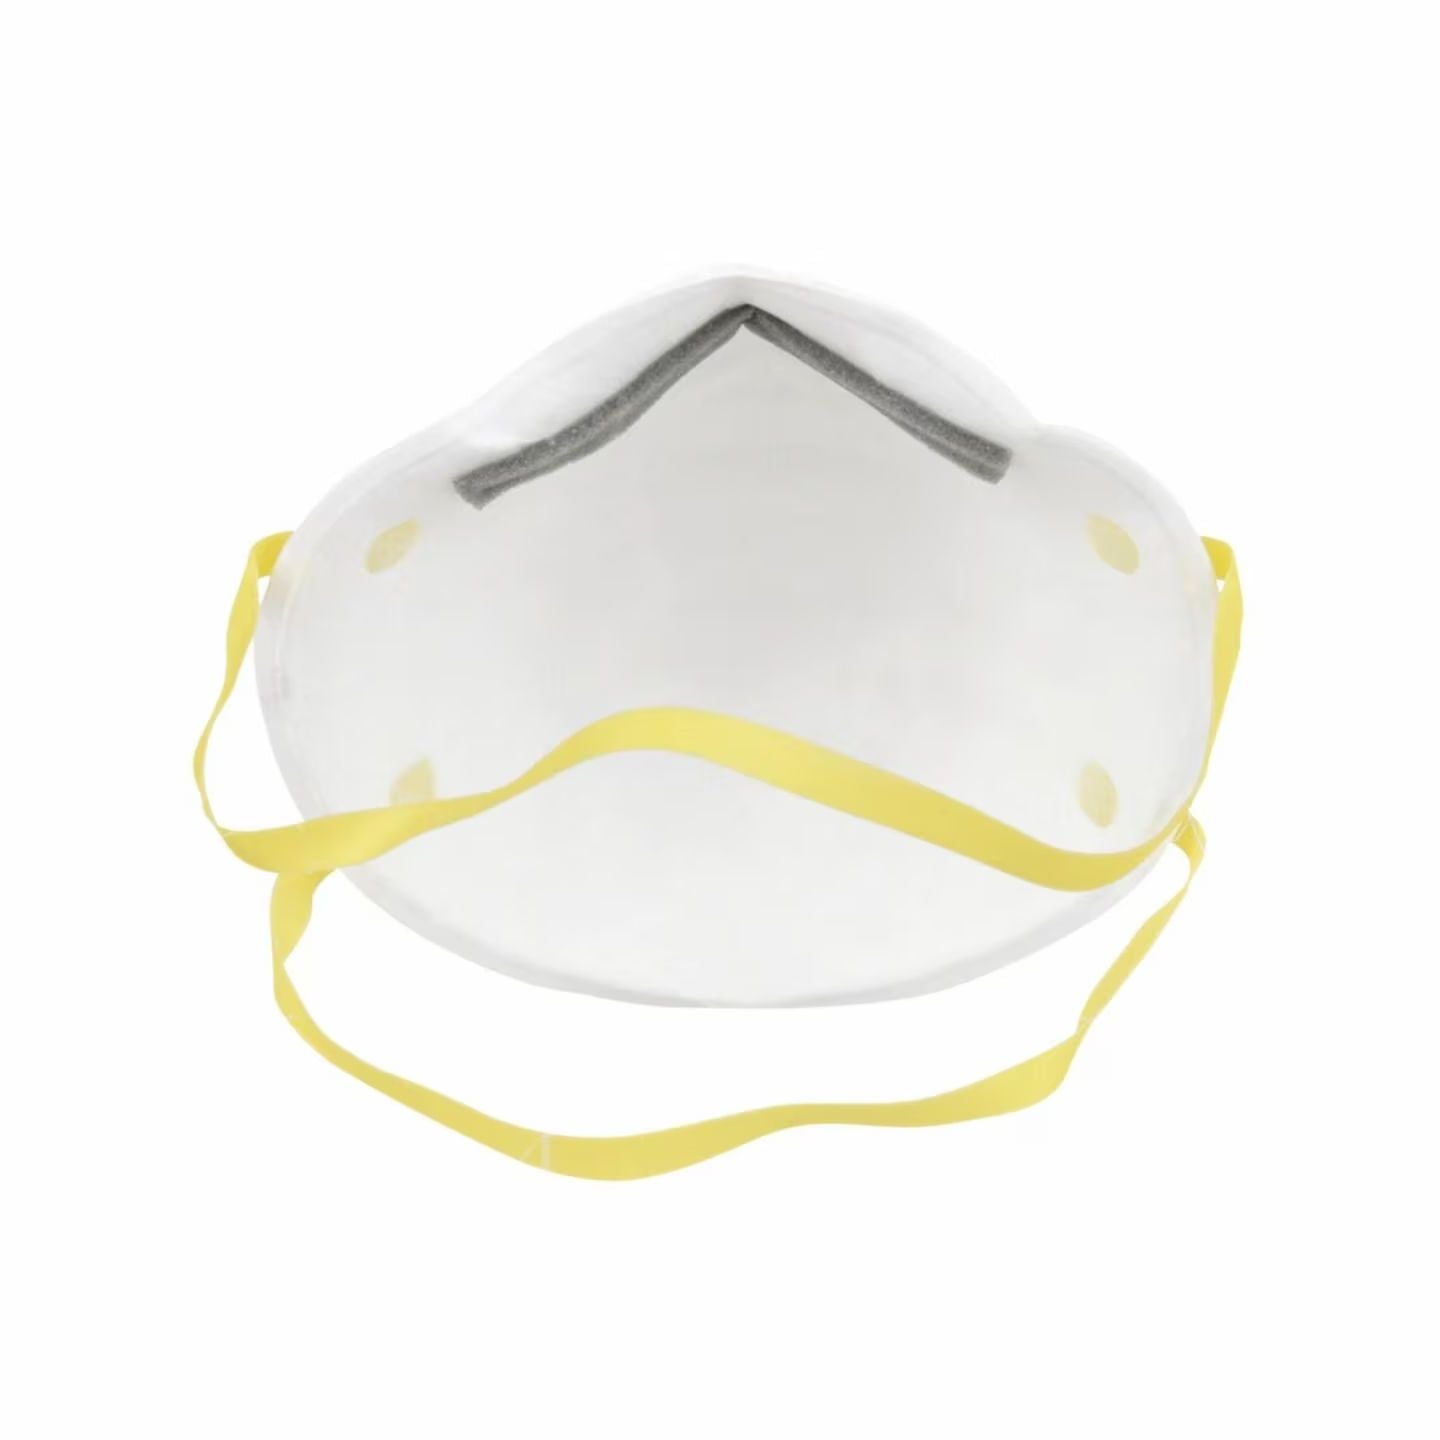 8210 - N95 Particulate Respirator - 10 Pack